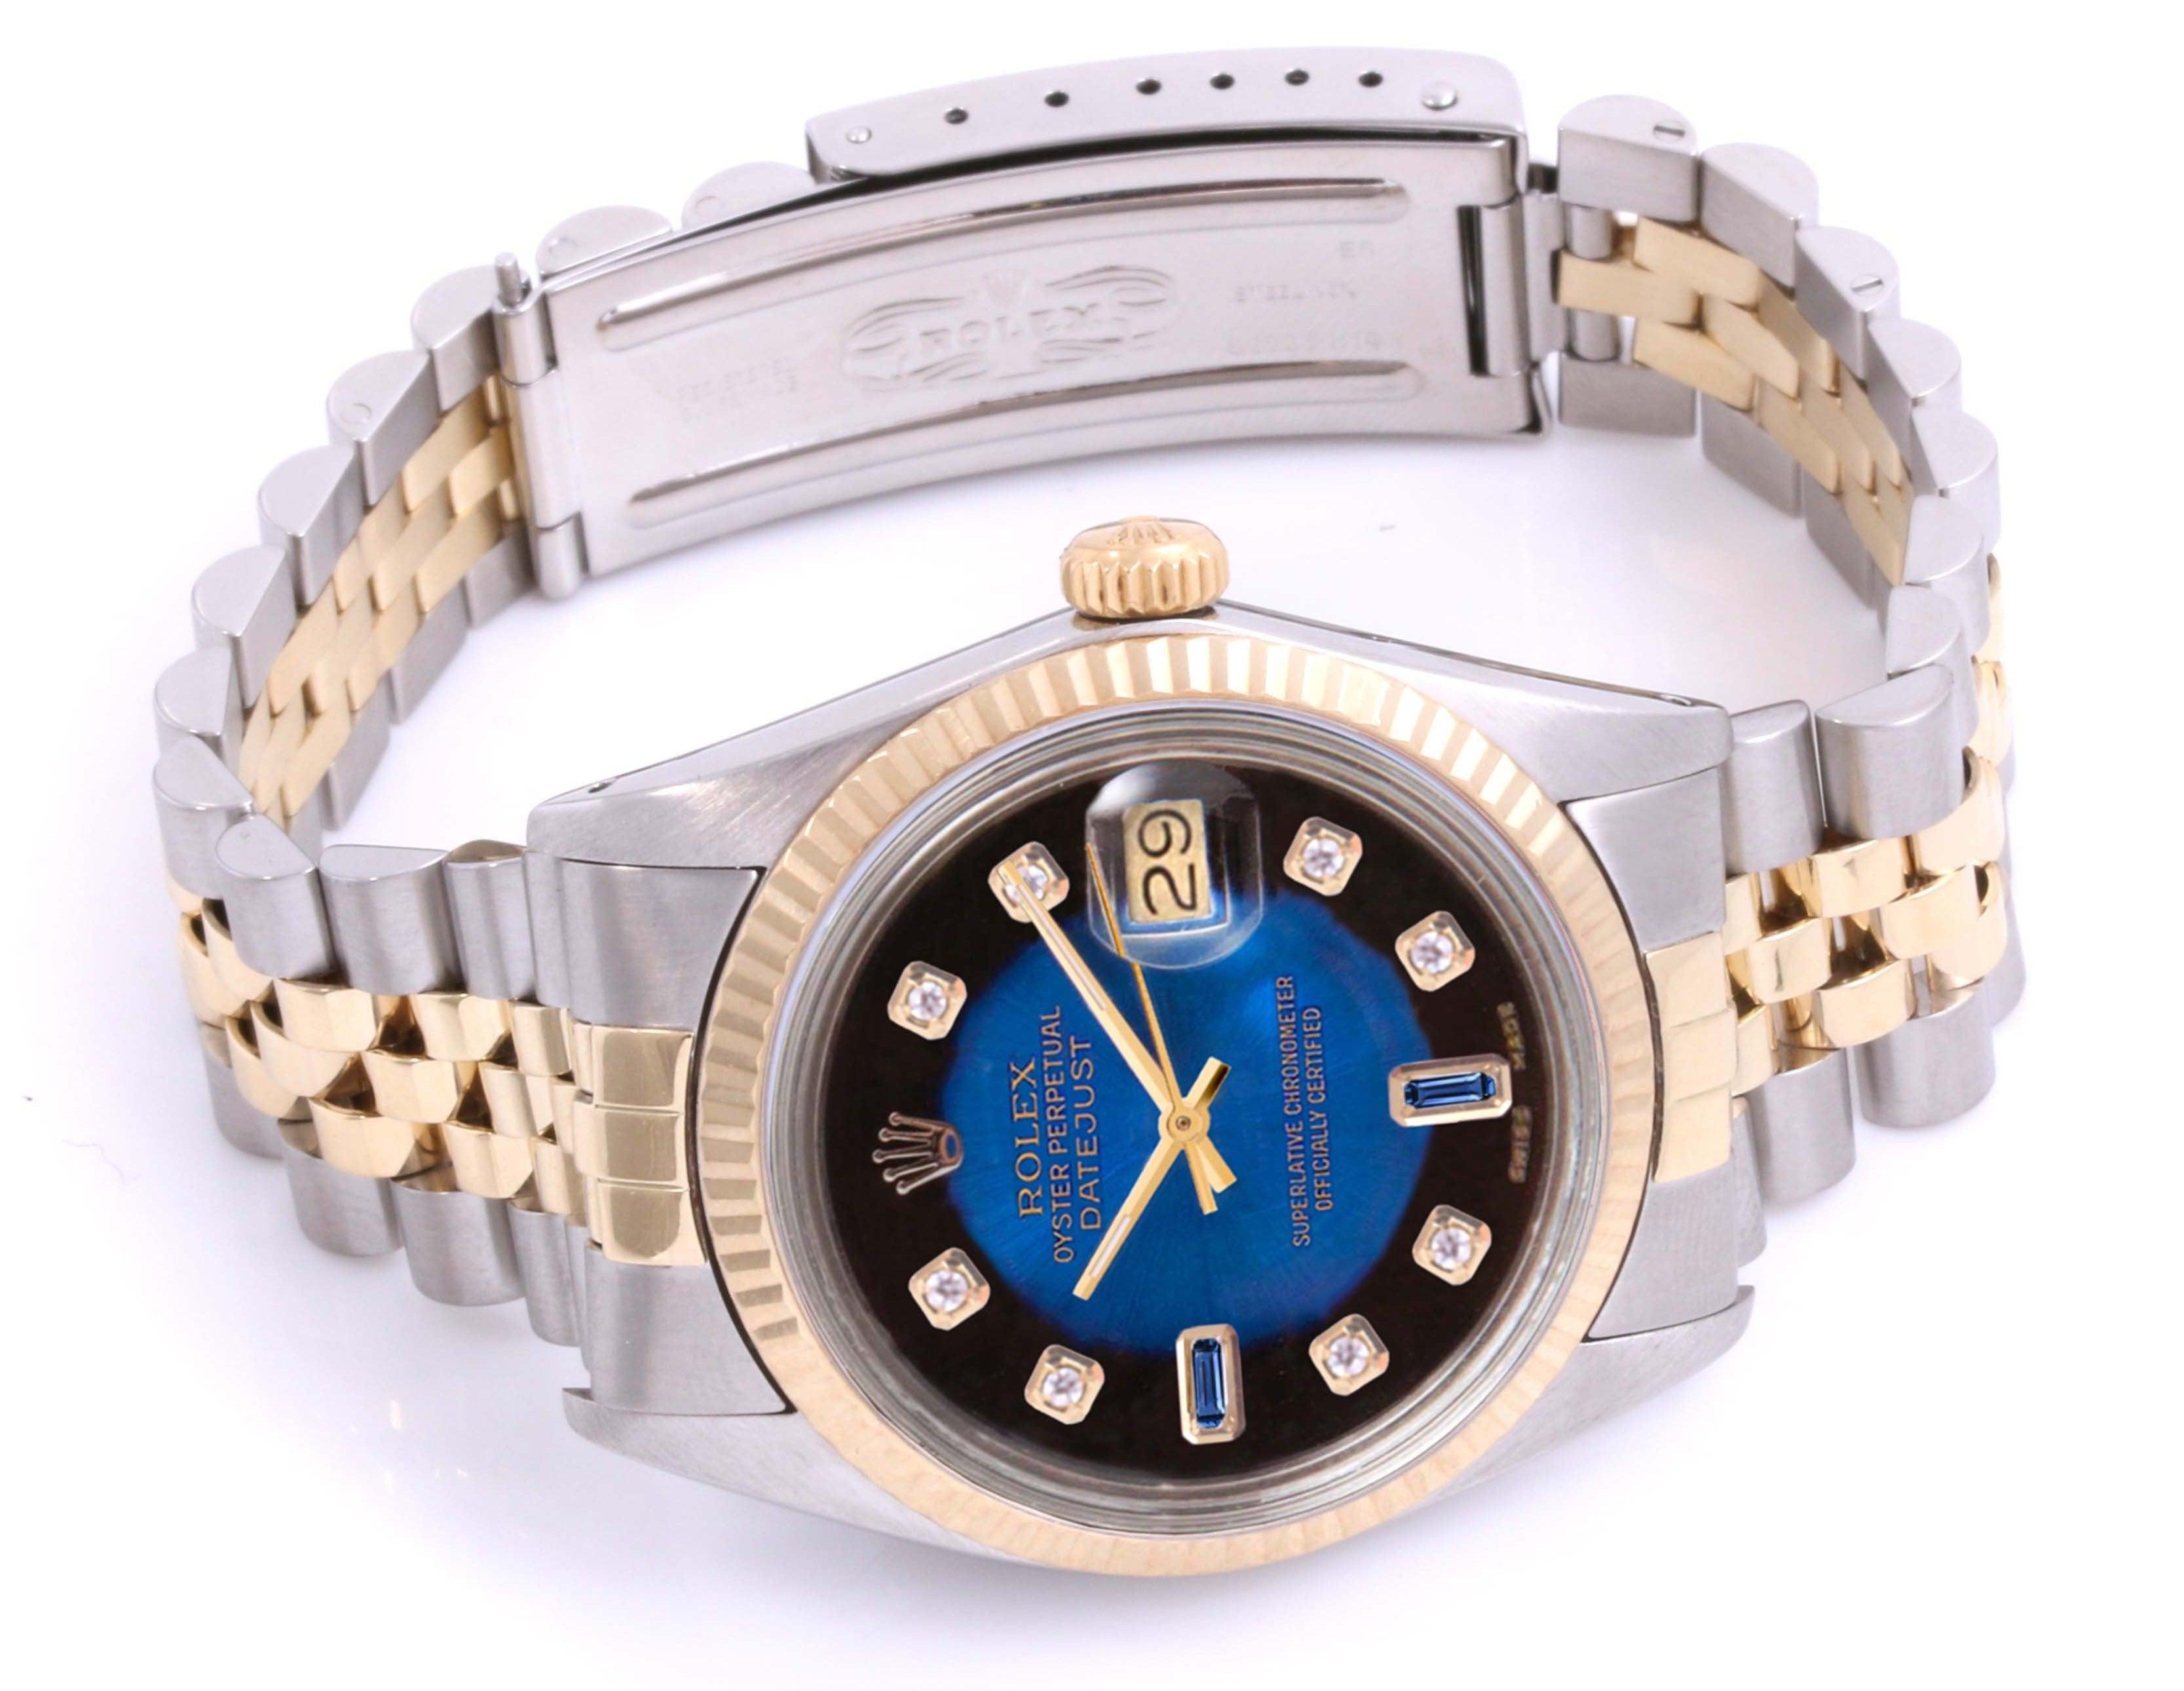 (Watch Description)
Brand - Rolex
Gender - Unisex
Model - 16013 Datejust
Metals - Yellow Gold / Steel 
Case size - 36mm
Bezel -Yellow Gold Diamond
Crystal - Sapphire
Movement - Automatic caliber 3035
Dial - Finished Blue Diamond
Wrist band - Two